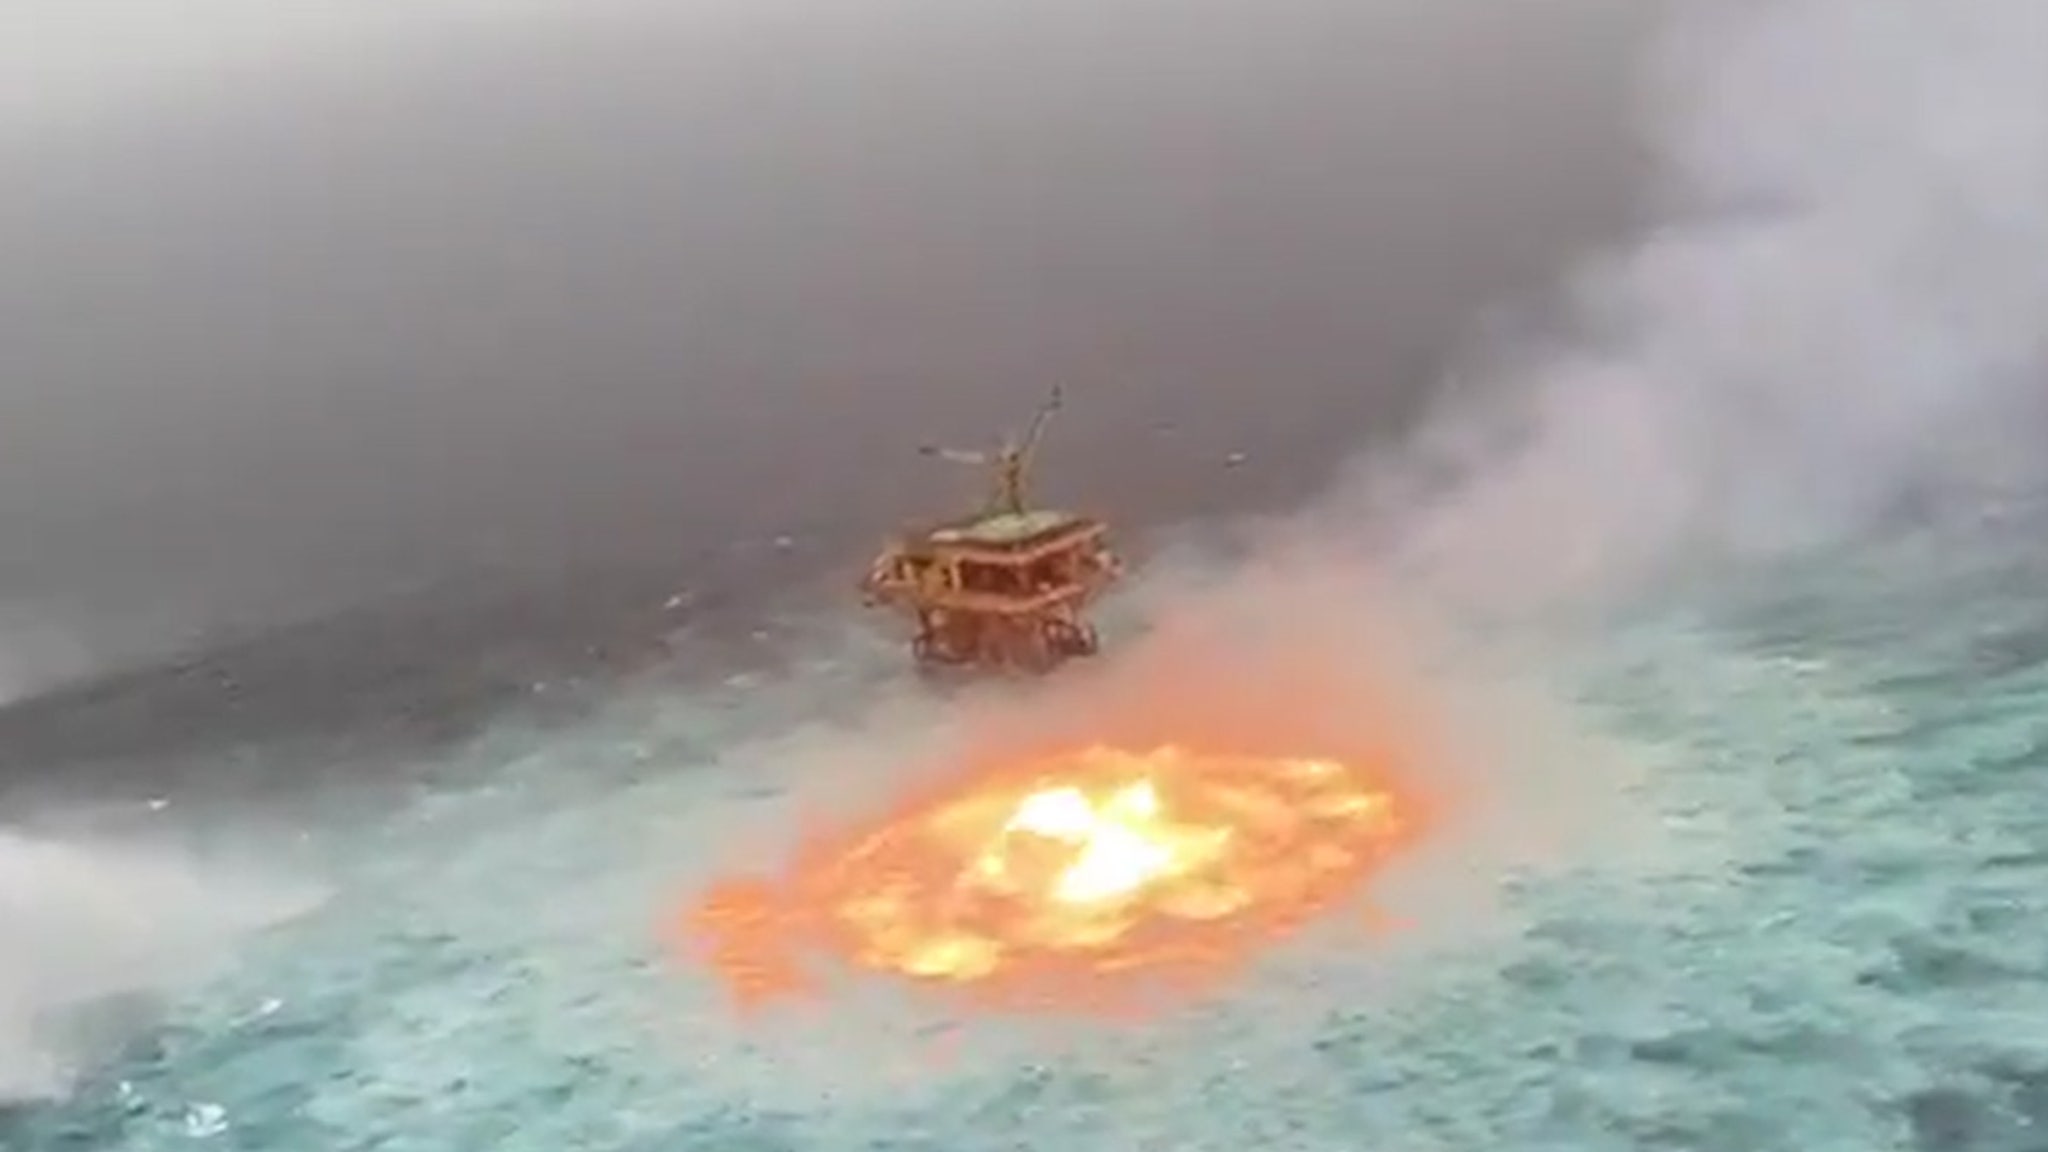 gulf of mexico fire fake